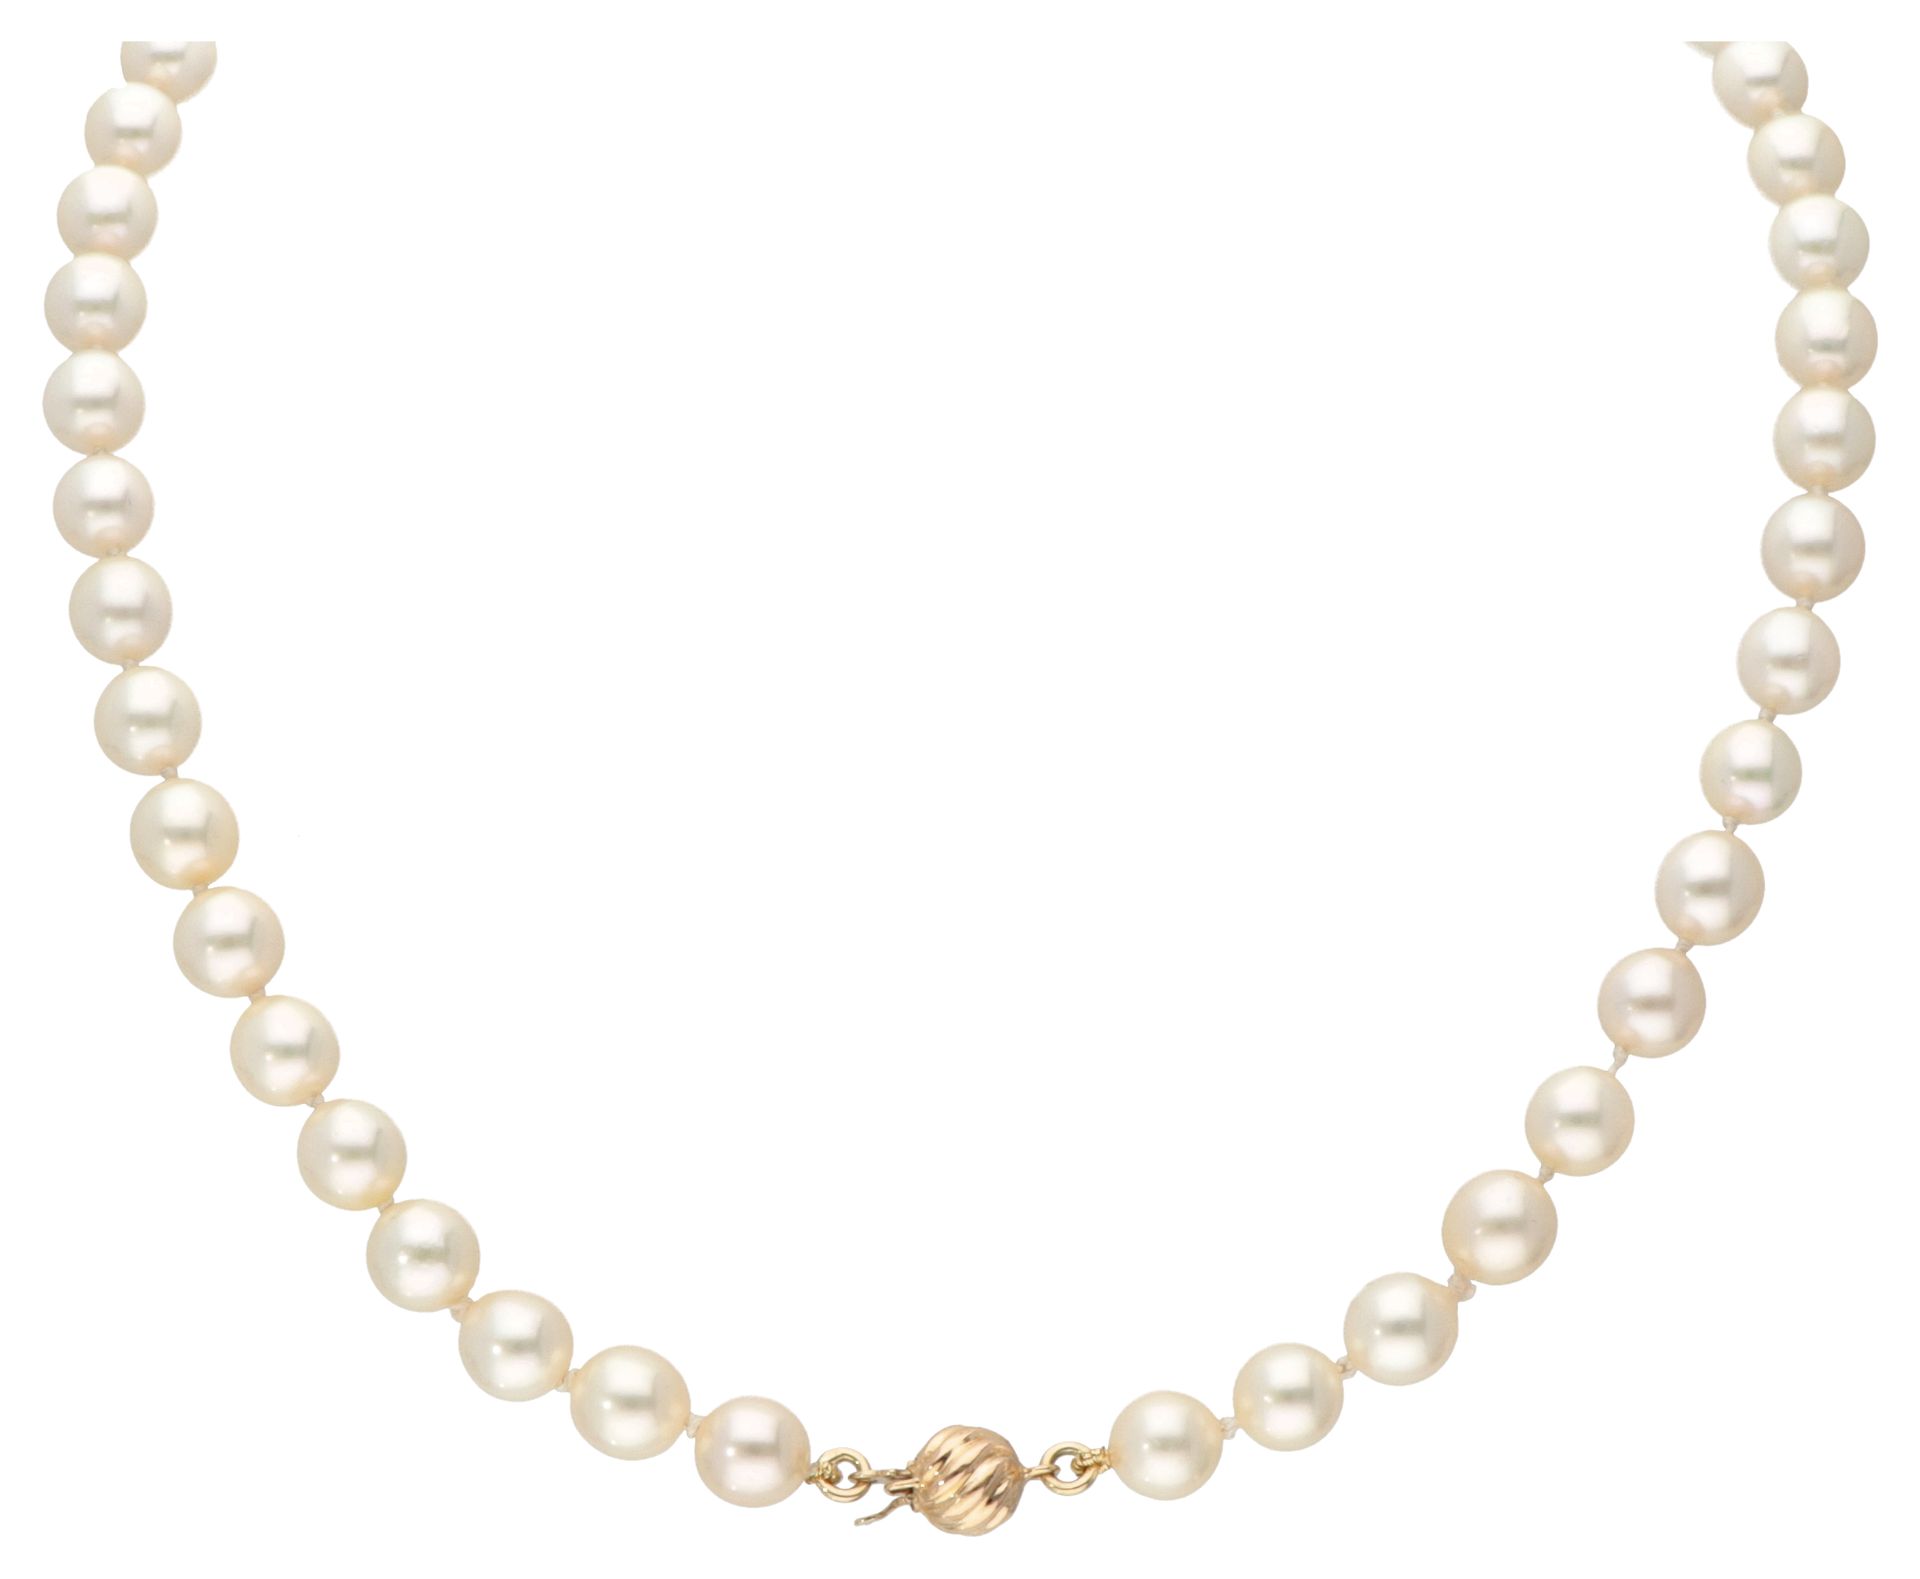 Saltwater pearl necklace with a 14K. Yellow gold closure. 印章：585。状况非常好。Ø 珍珠：约7.0&hellip;